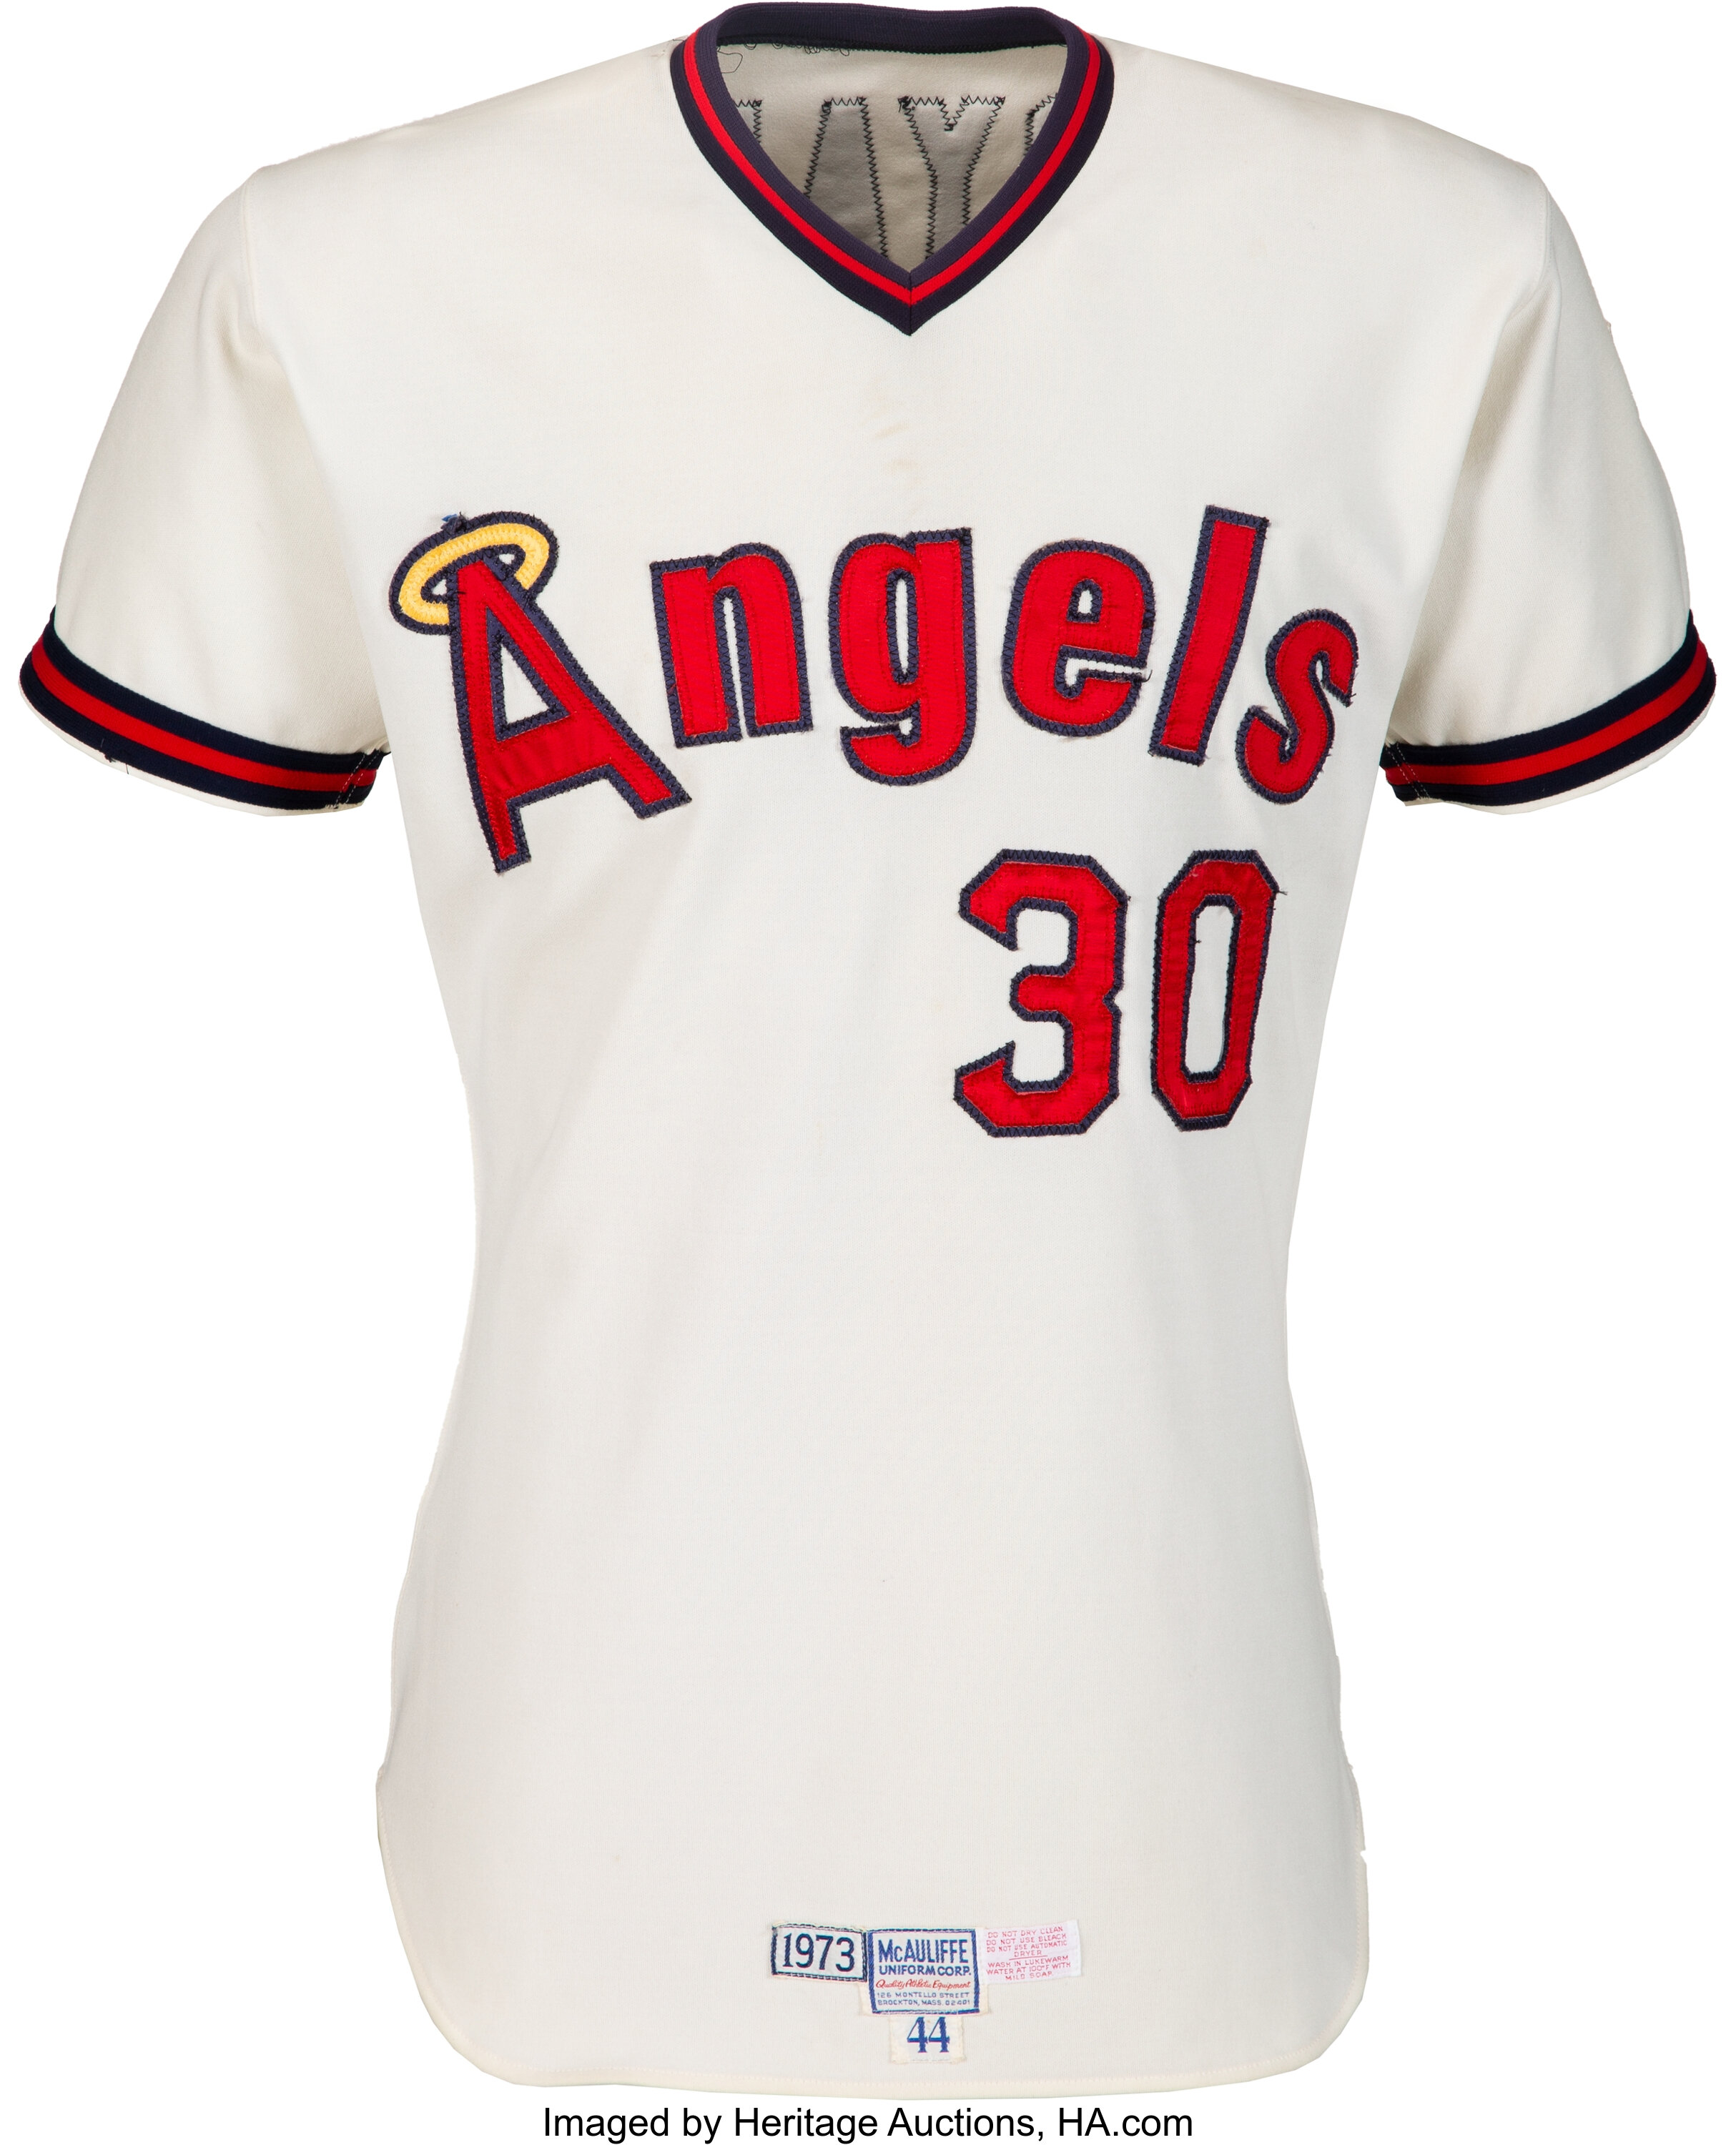 1983-90 California Angels Blank Game Issued Blue Jersey Batting